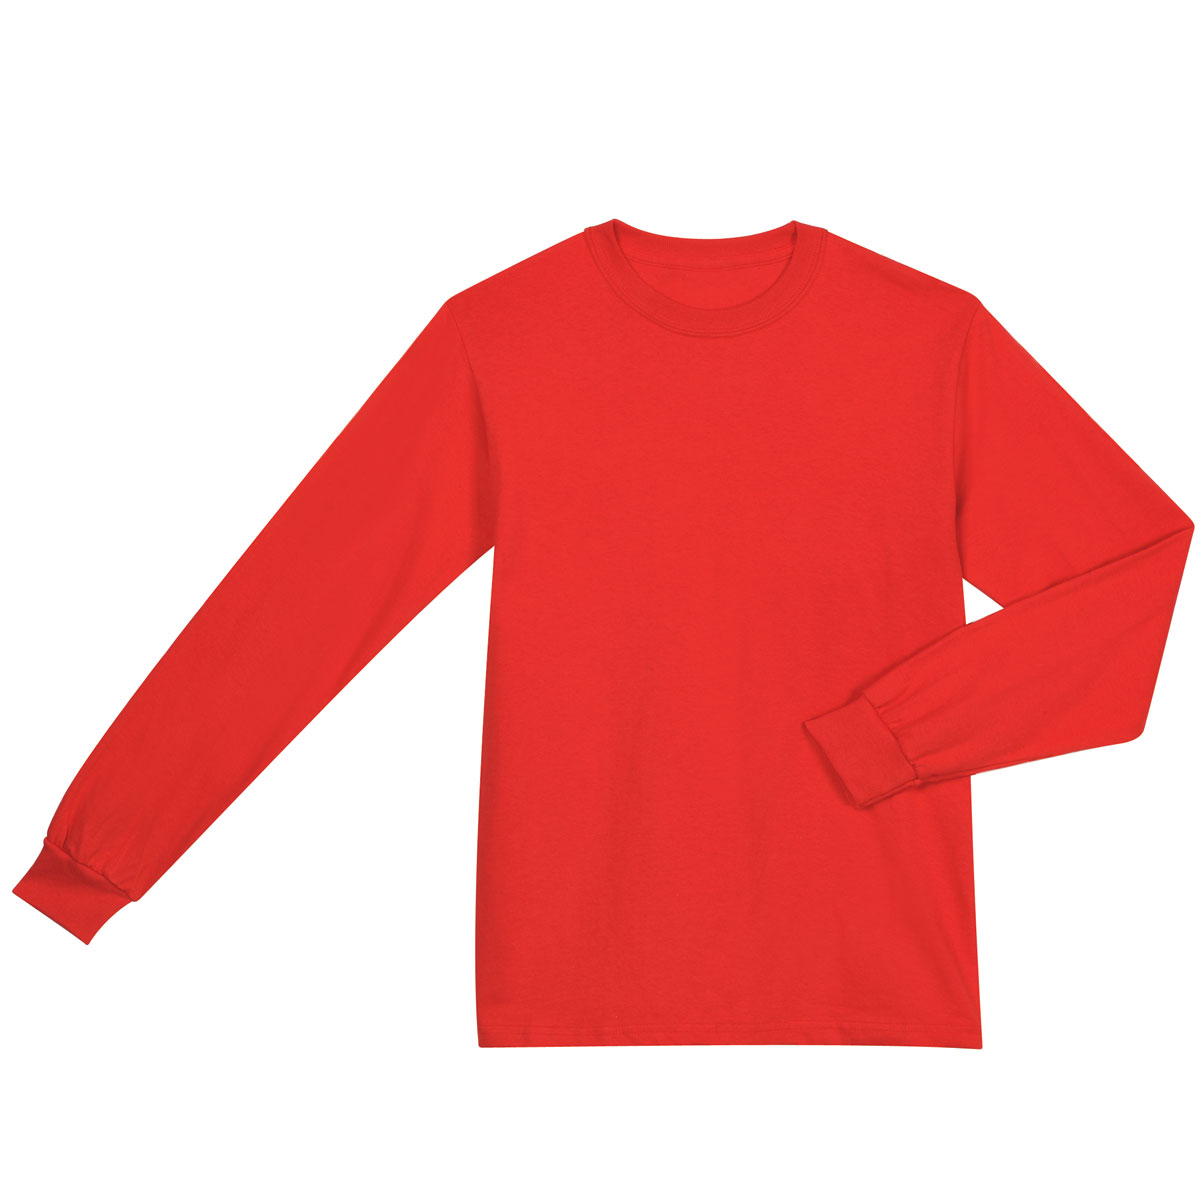 Long Sleeve T Shirt Clip Art | Images and Photos finder